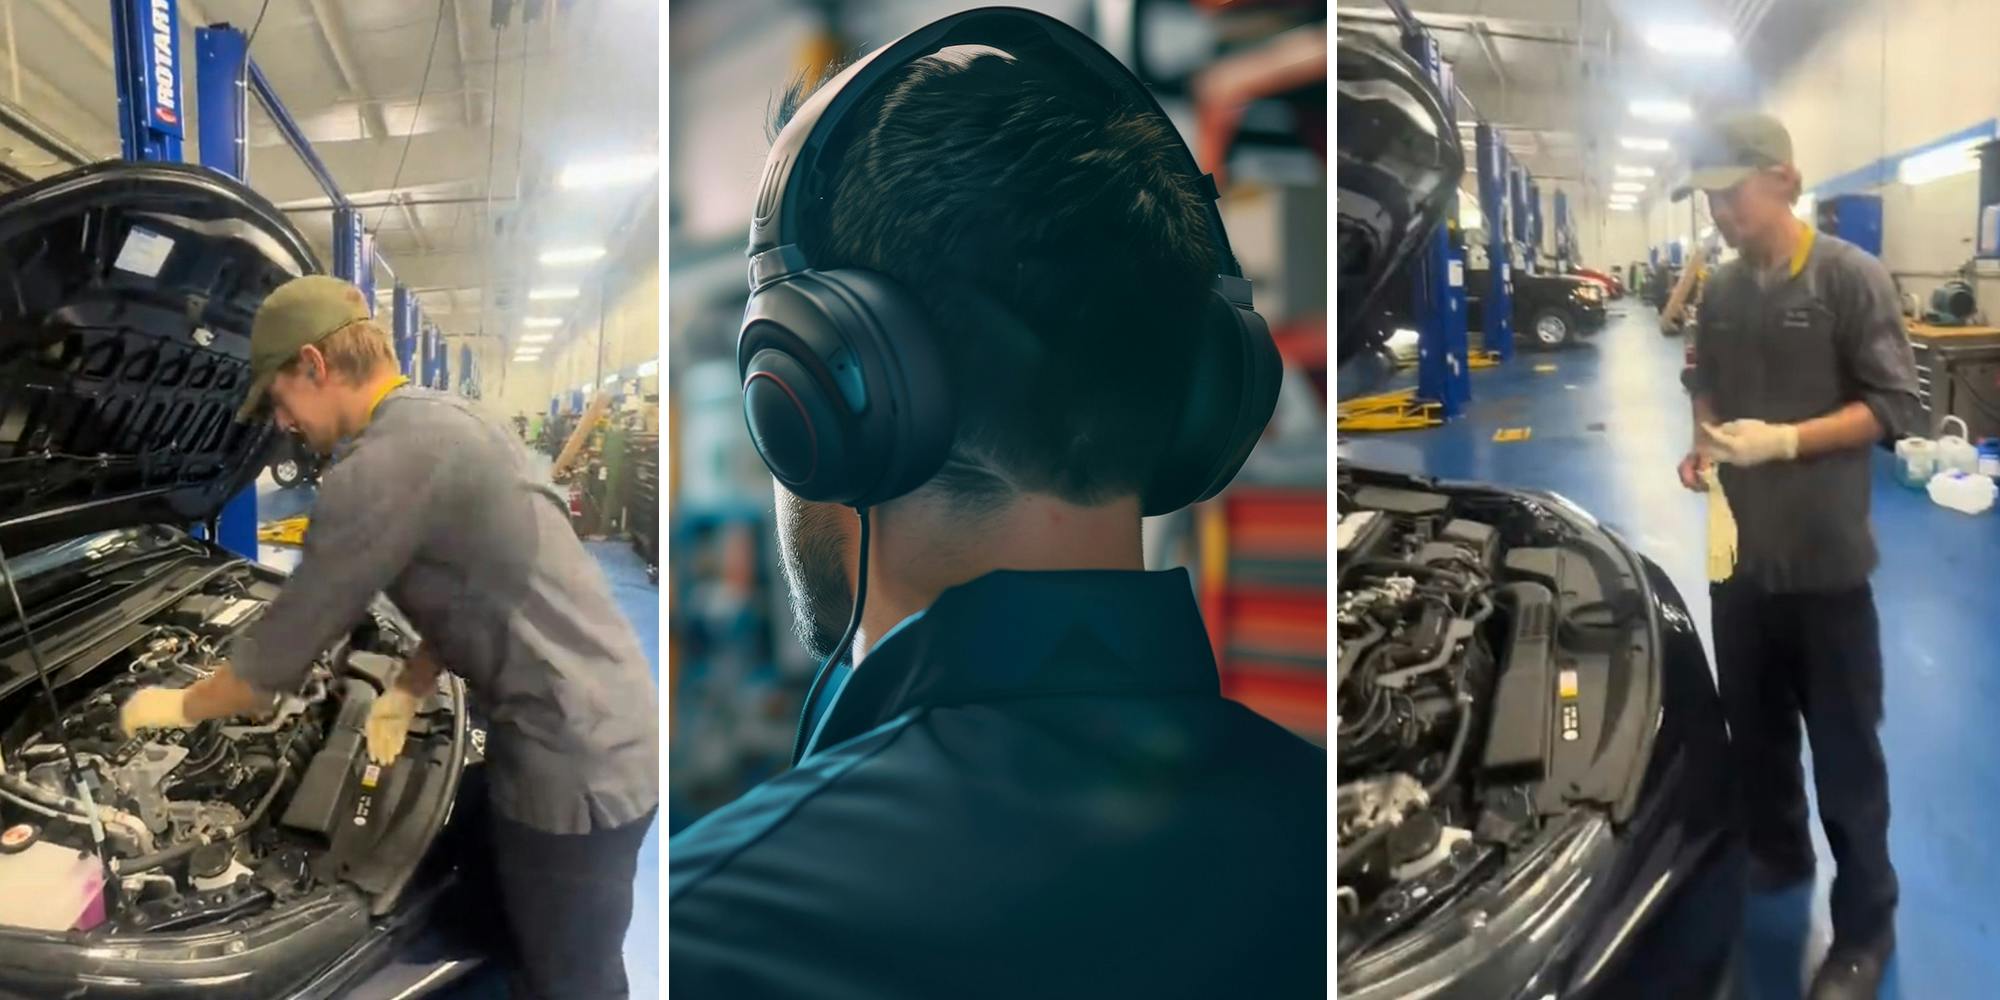 Mechanic reveals the real reason they wear headphones in the shop